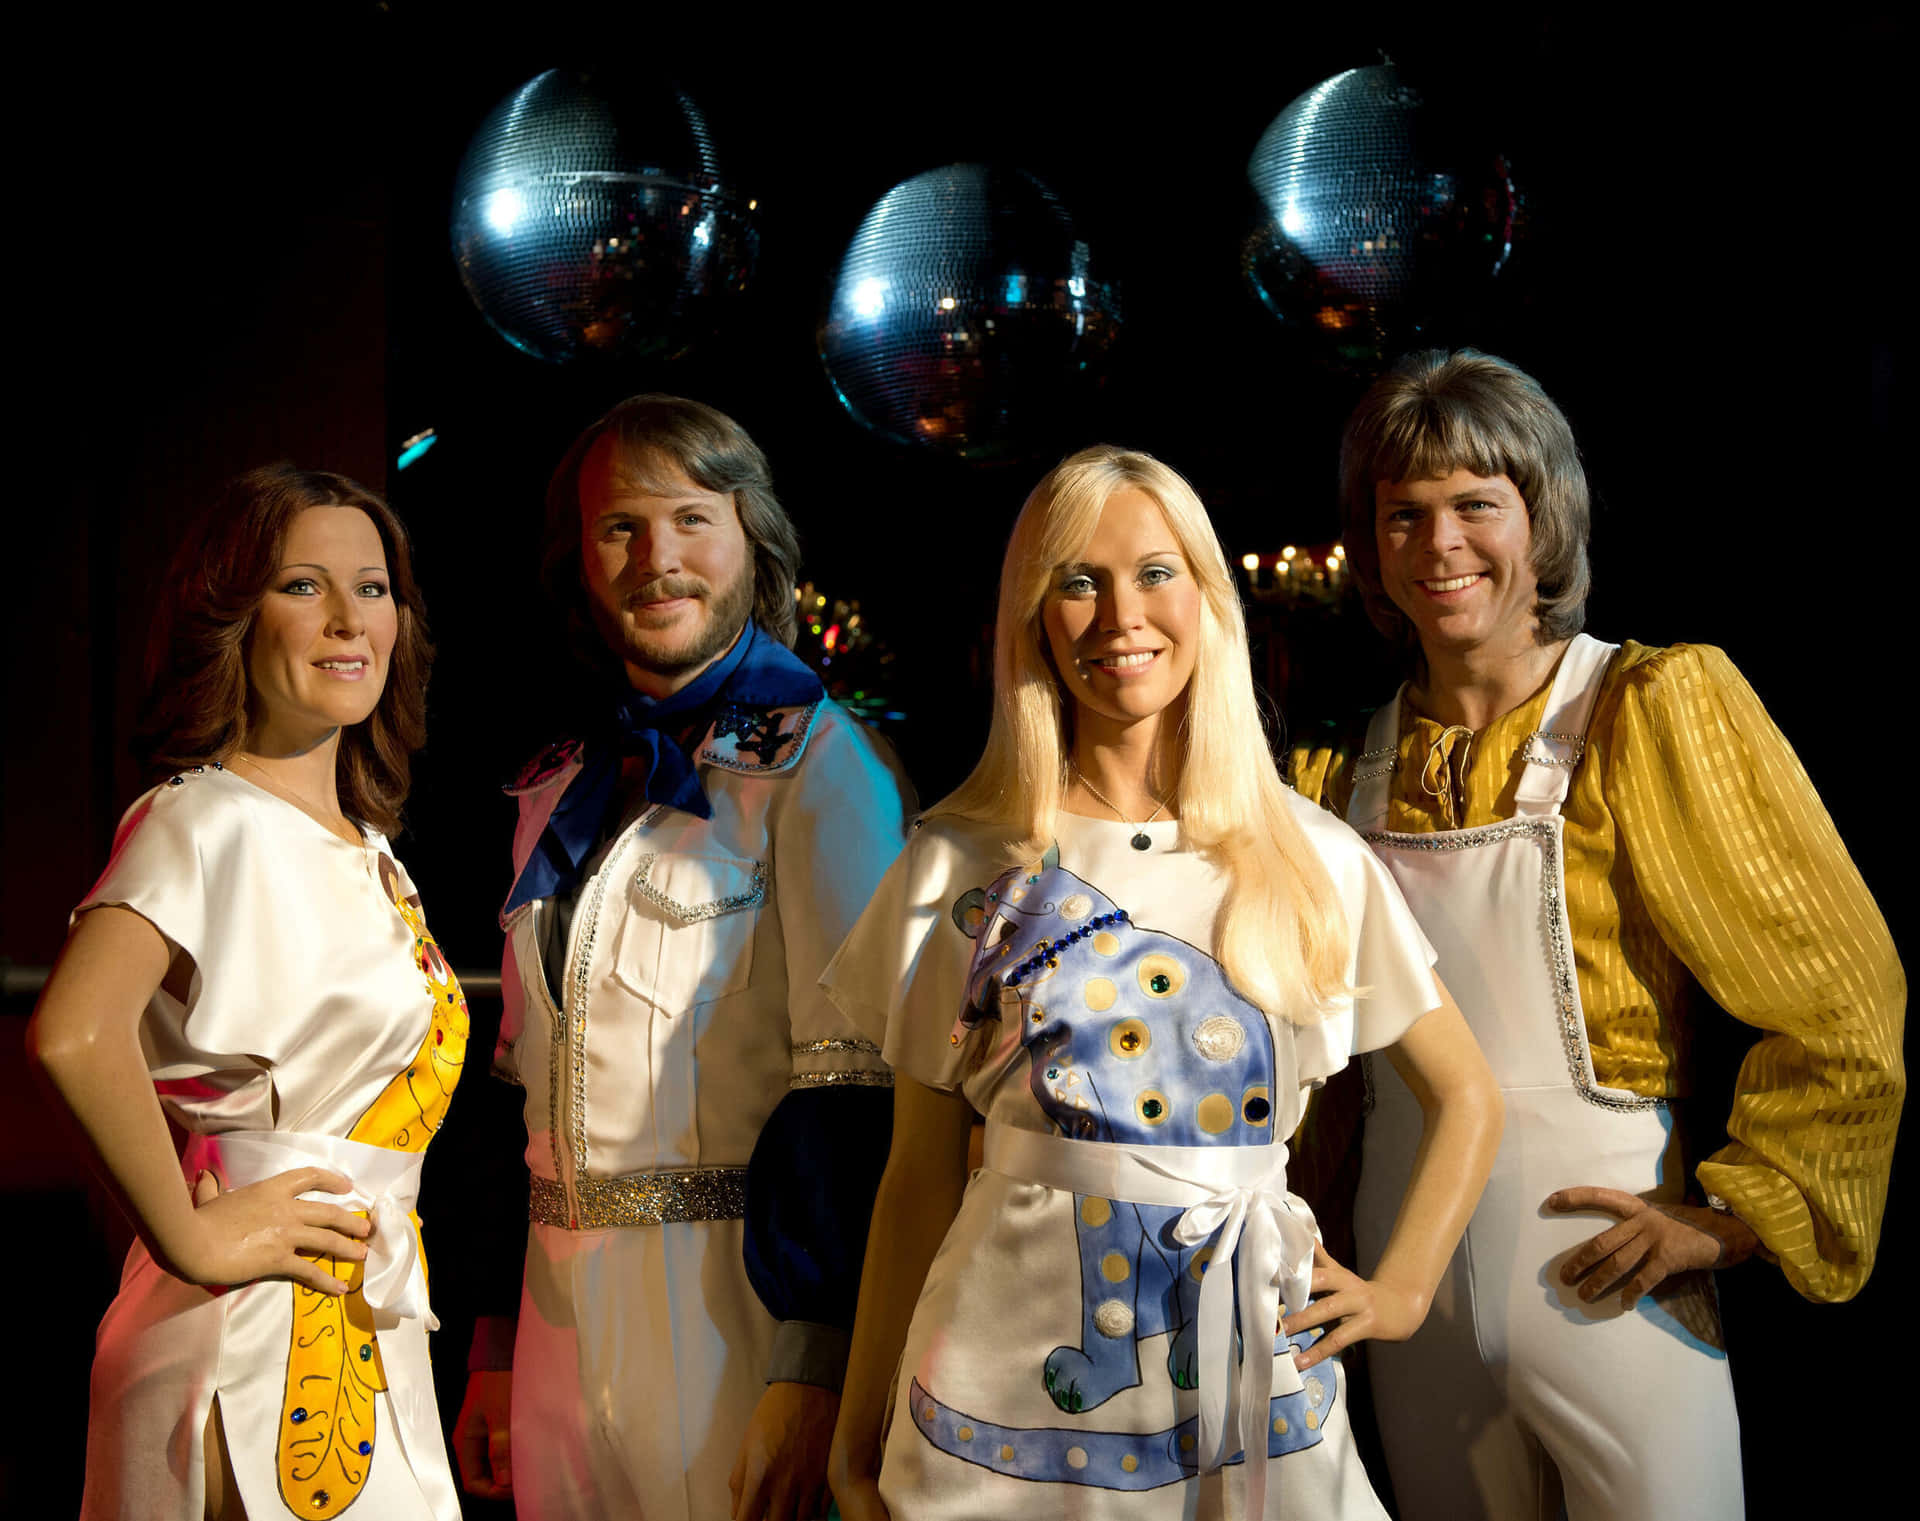 Celebrating the musical legacy of ABBA - the European pop icons of the 70s and 80s.